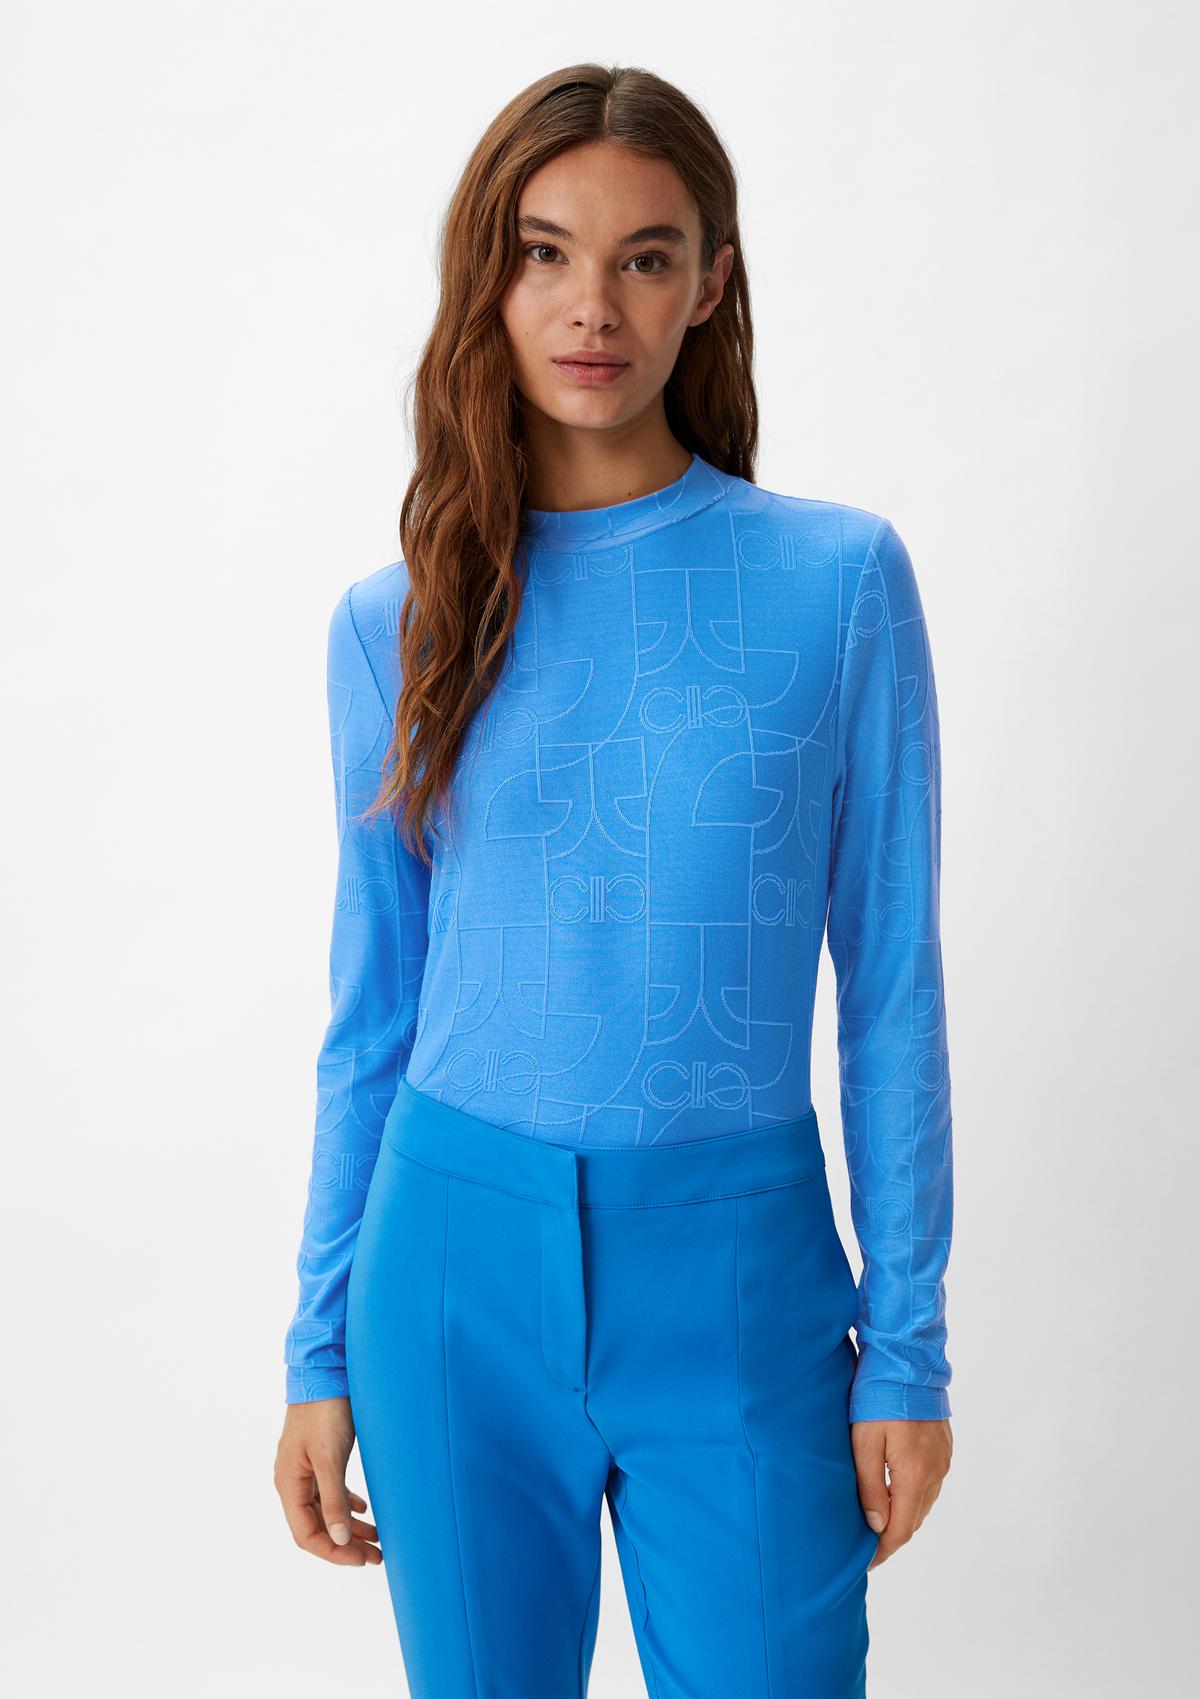 Long sleeve top with a logo pattern